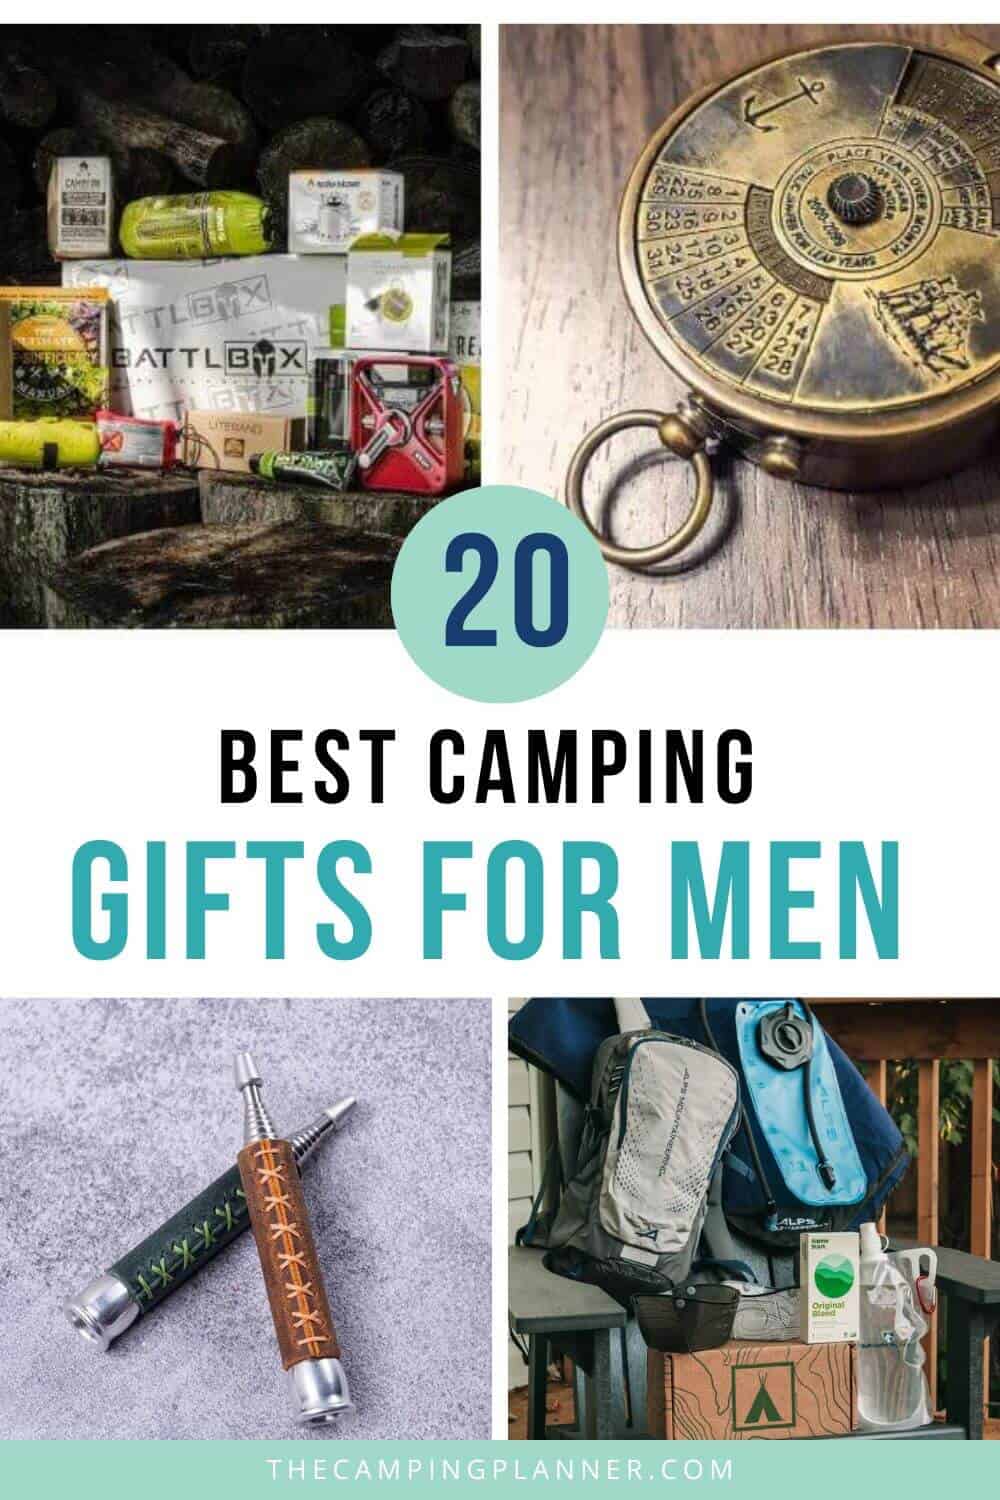 20 best camping gifts for men.